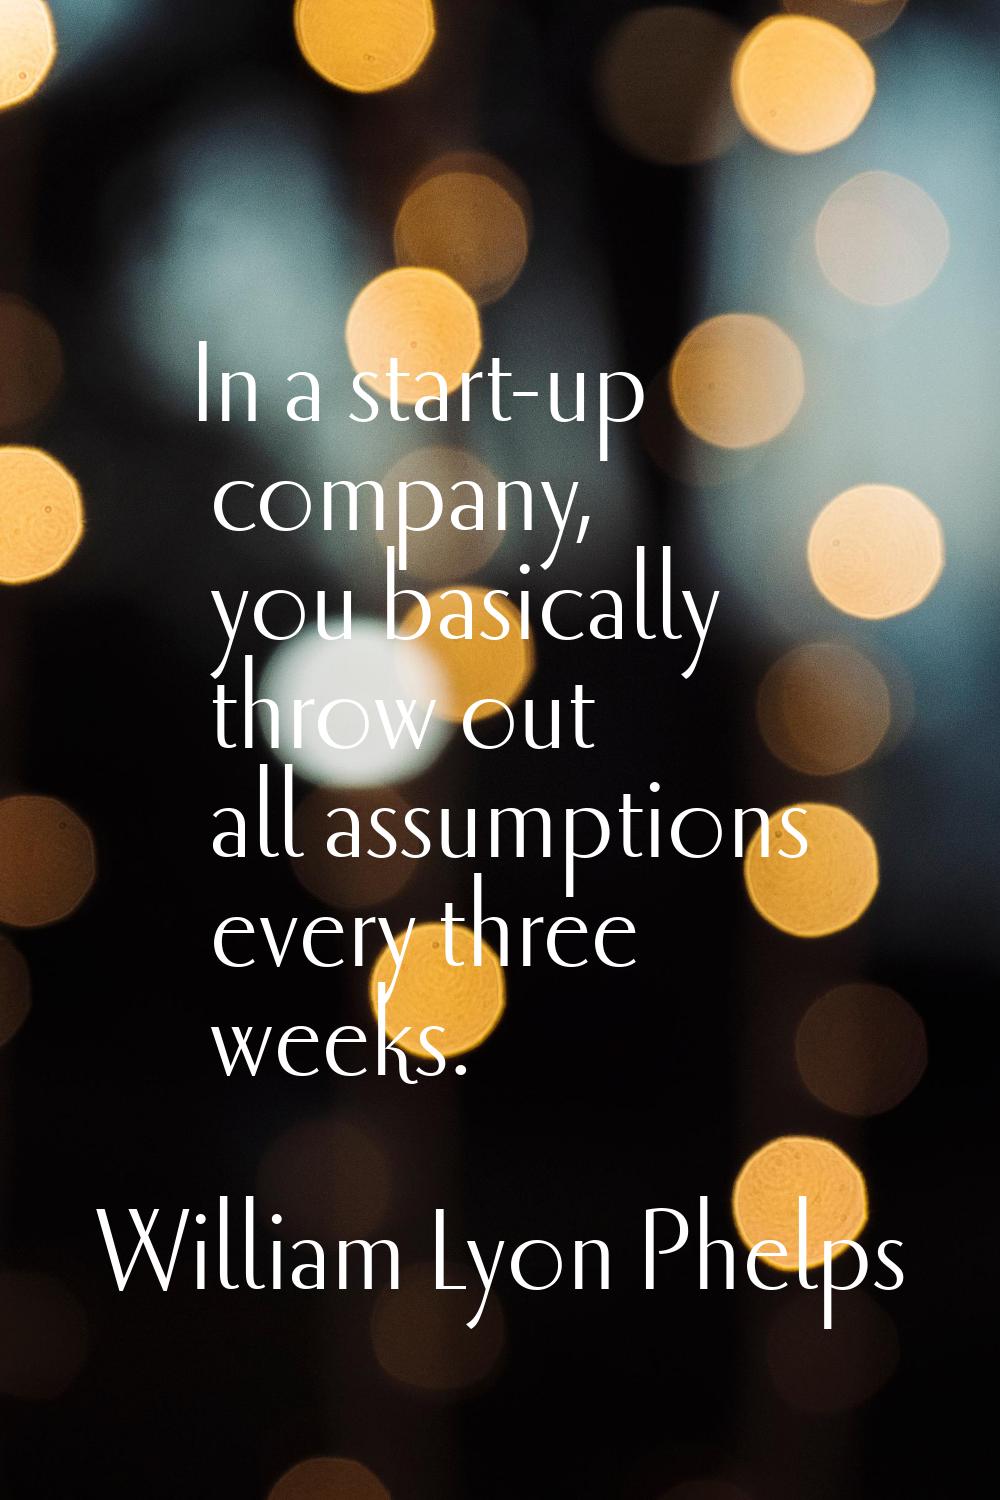 In a start-up company, you basically throw out all assumptions every three weeks.